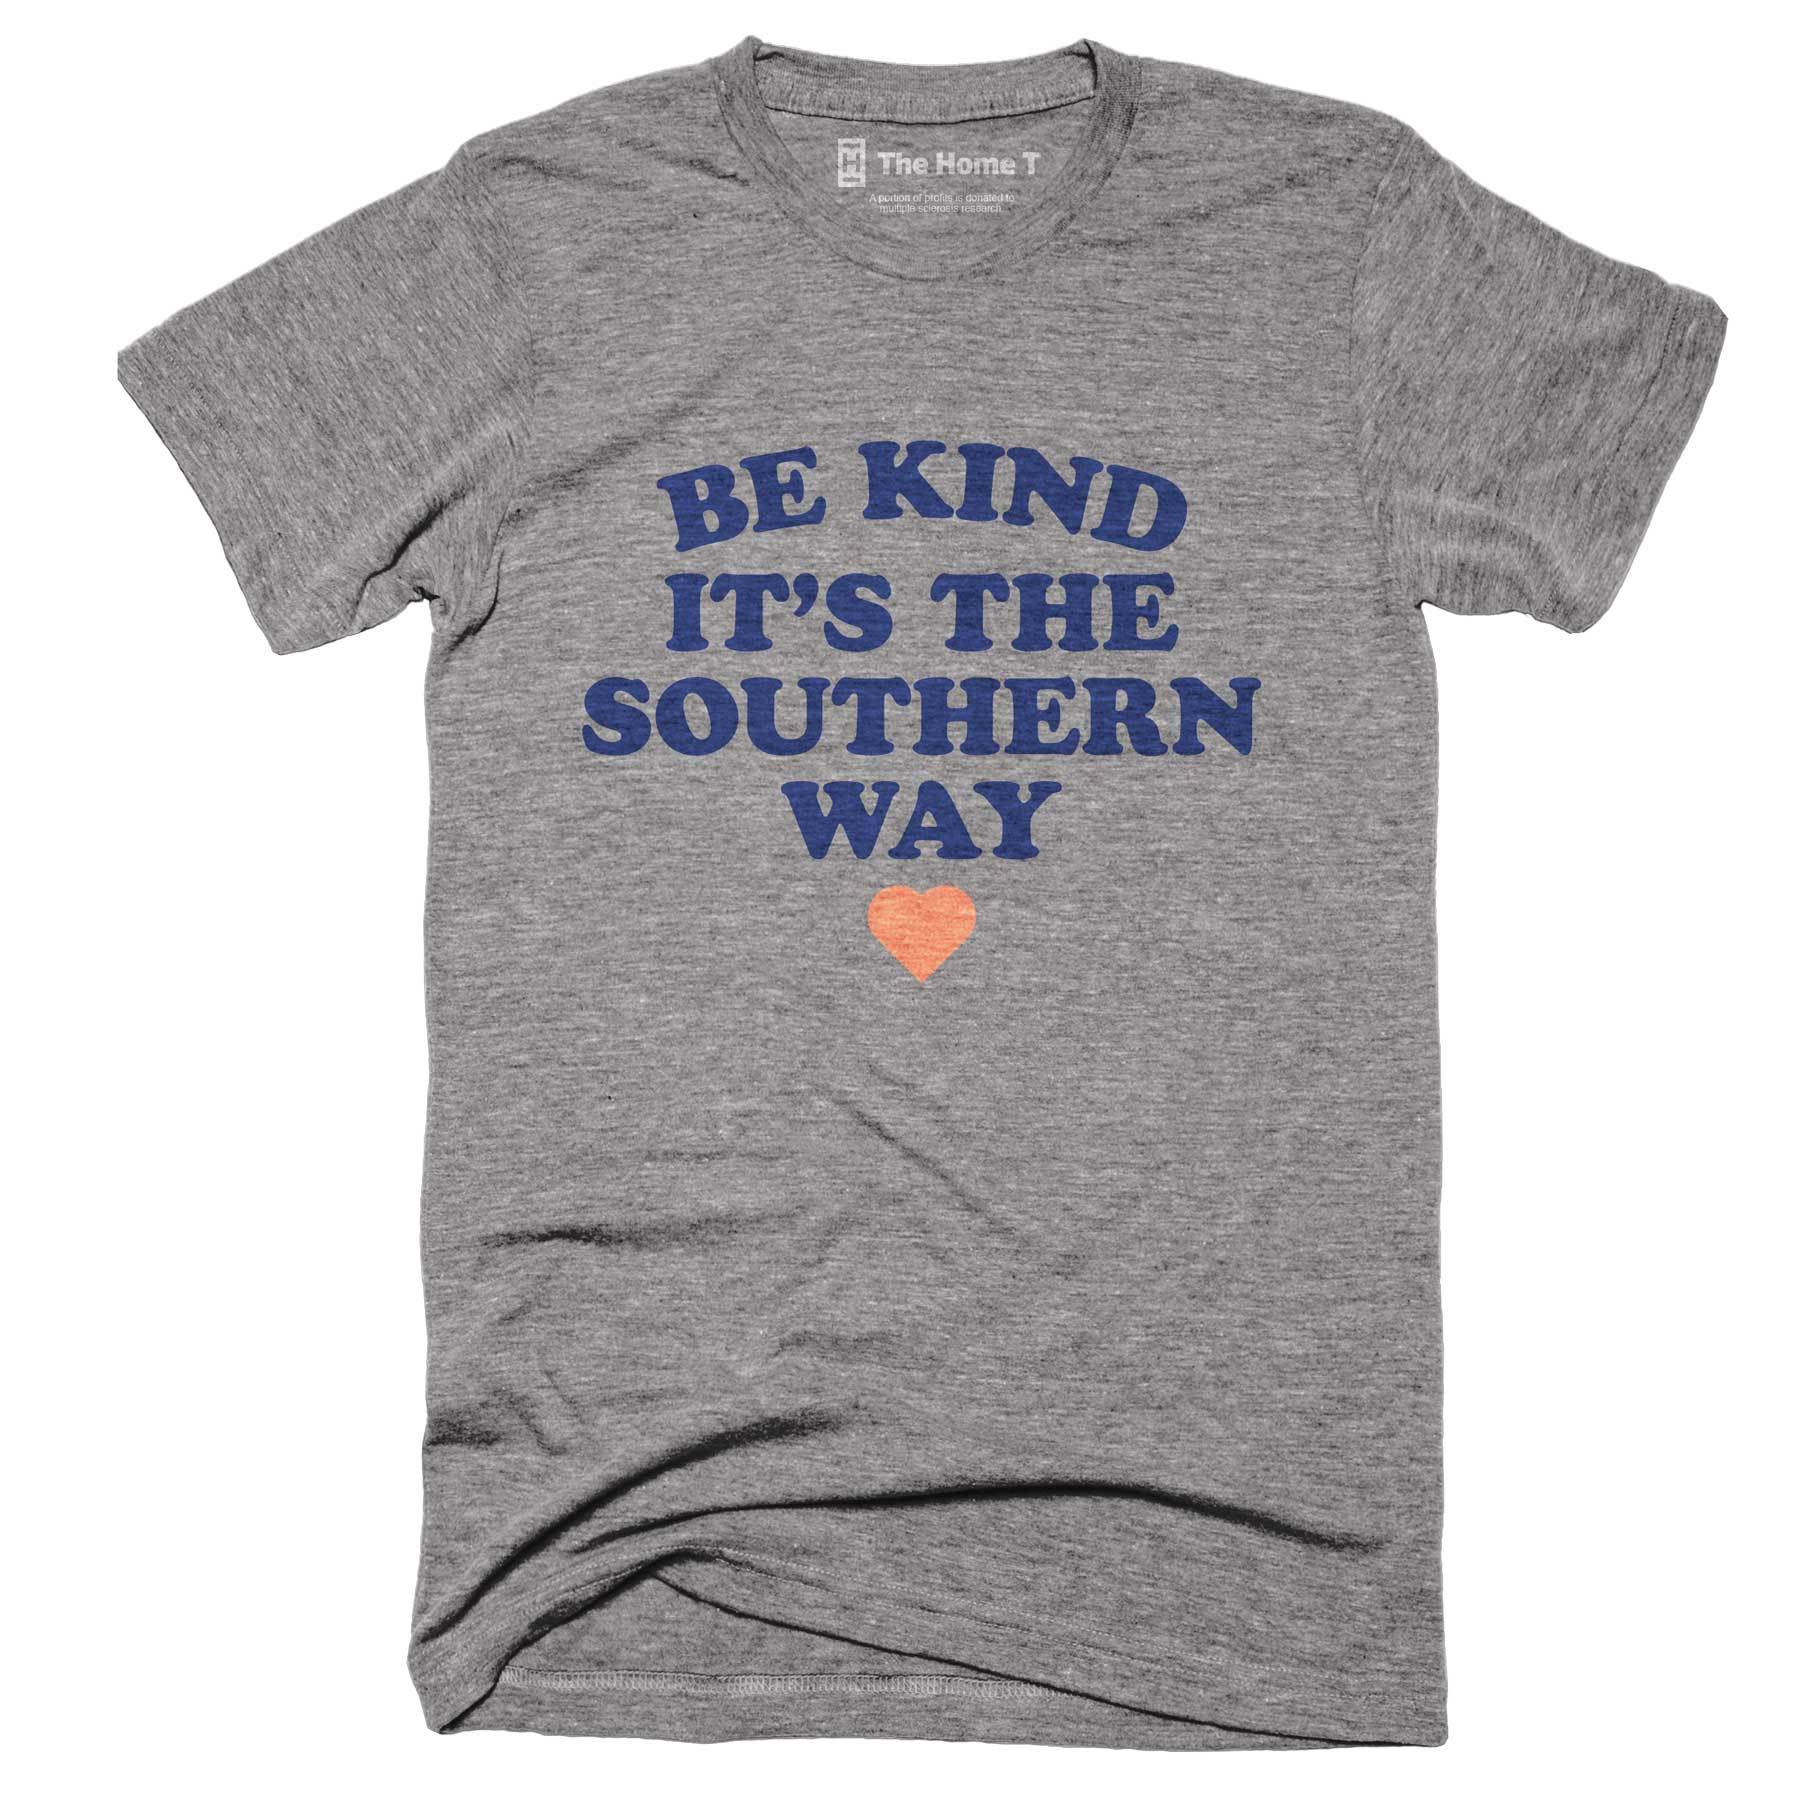 Be Kind It's the Southern Way